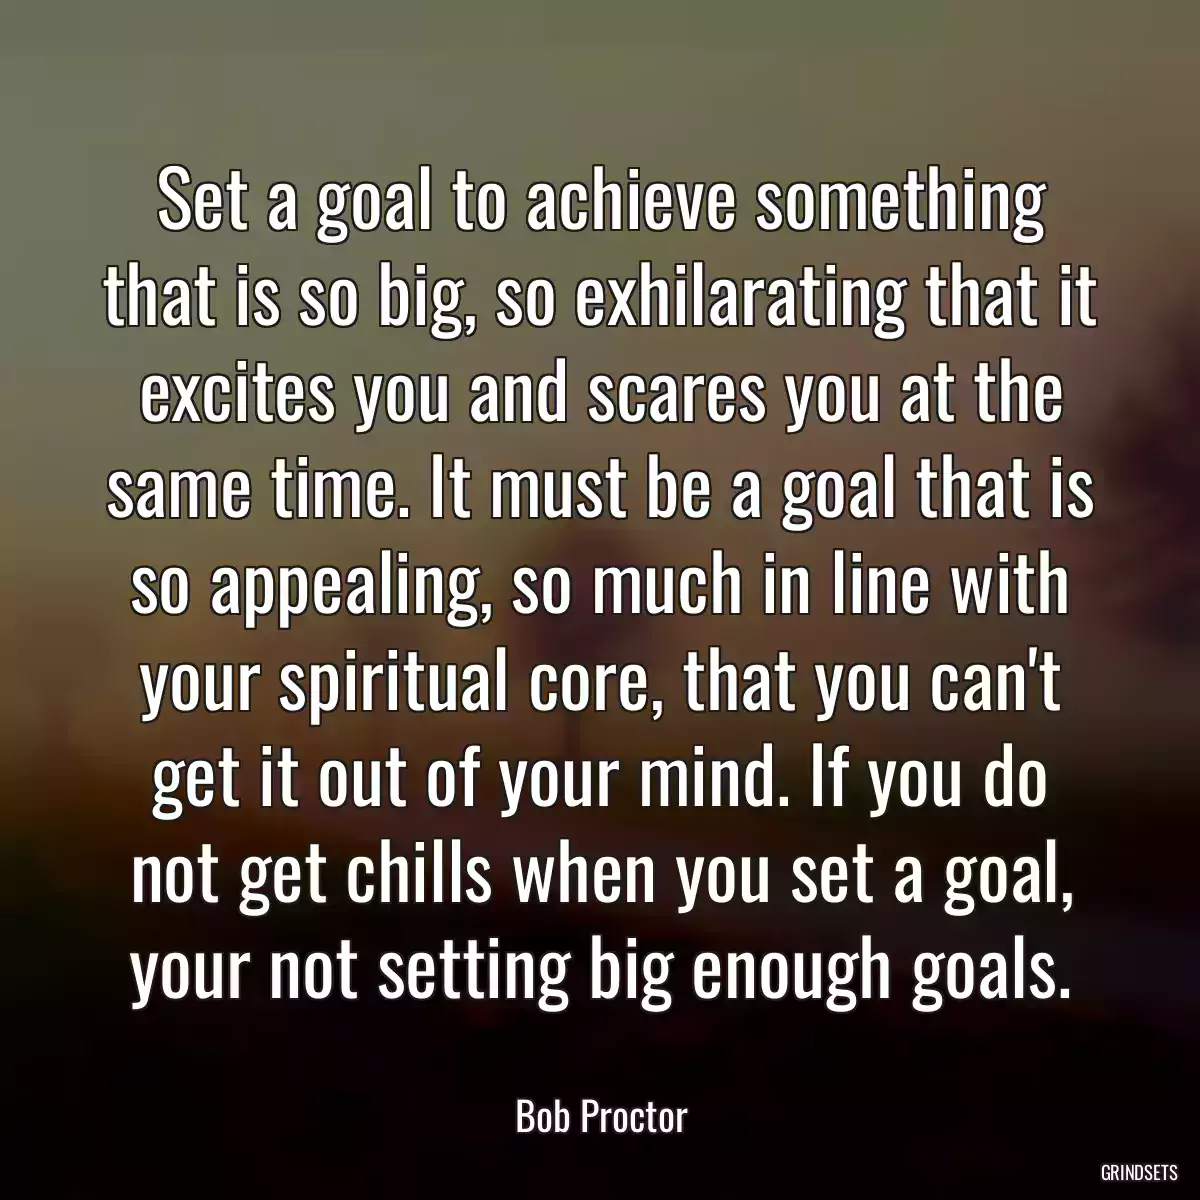 Set a goal to achieve something that is so big, so exhilarating that it excites you and scares you at the same time. It must be a goal that is so appealing, so much in line with your spiritual core, that you can\'t get it out of your mind. If you do not get chills when you set a goal, your not setting big enough goals.